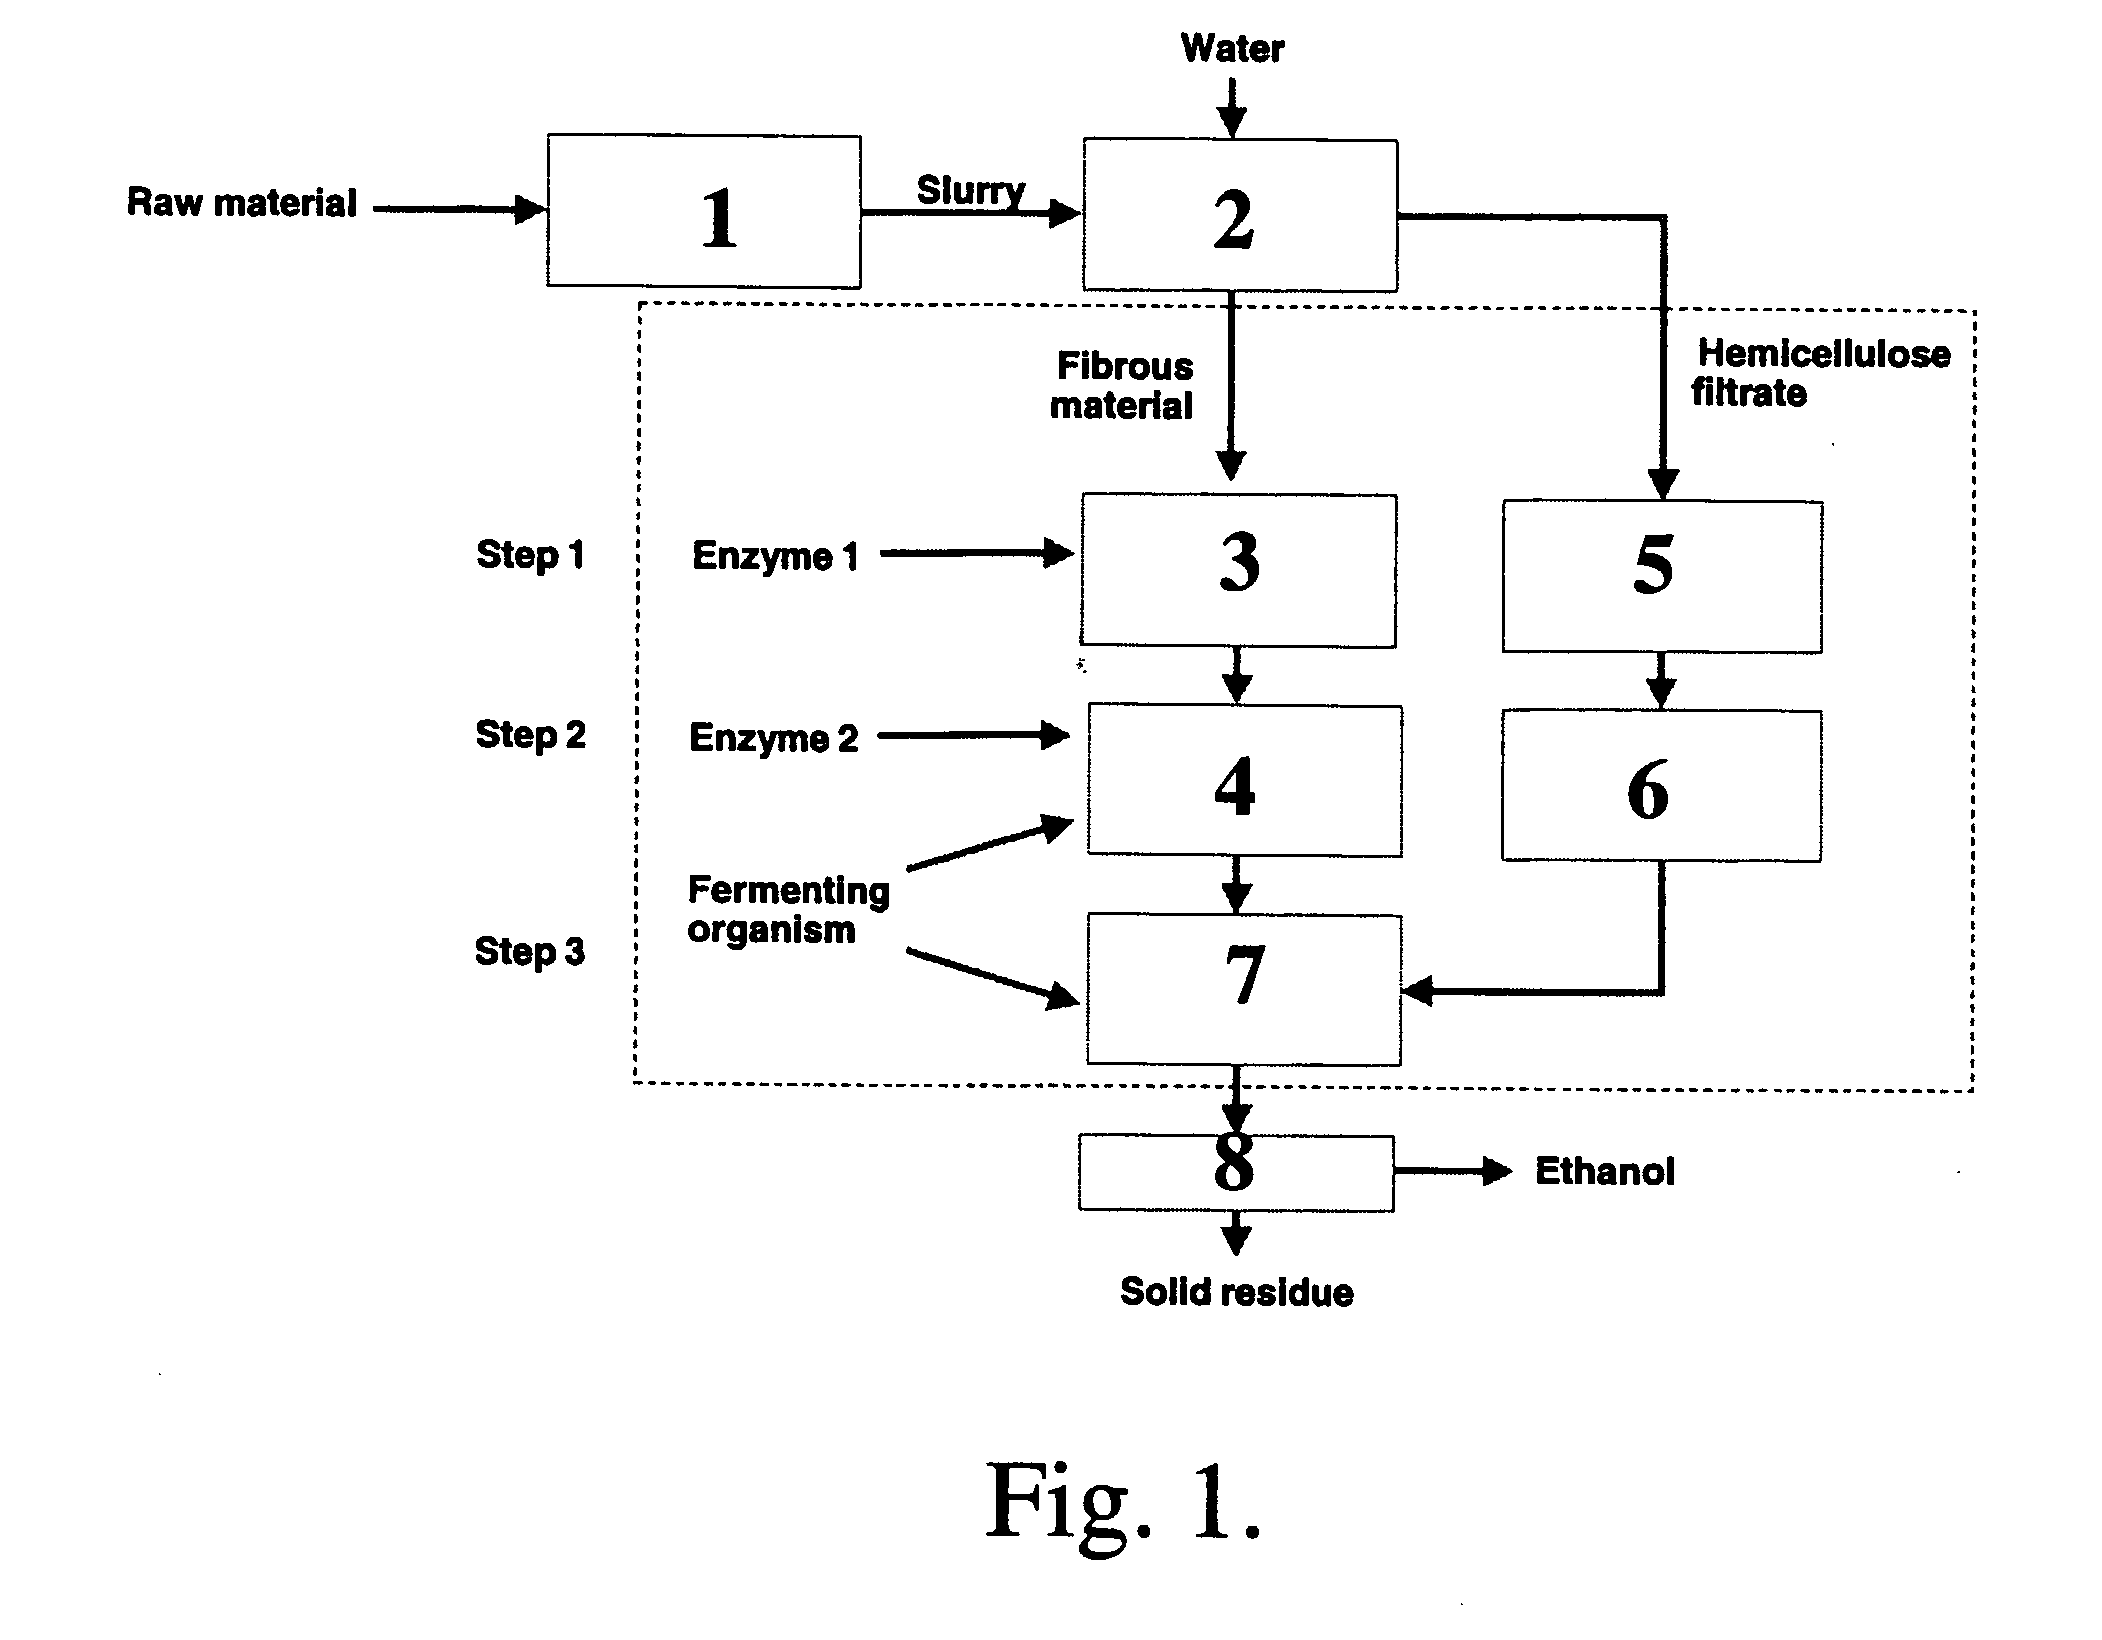 Process for Producing Ethanol